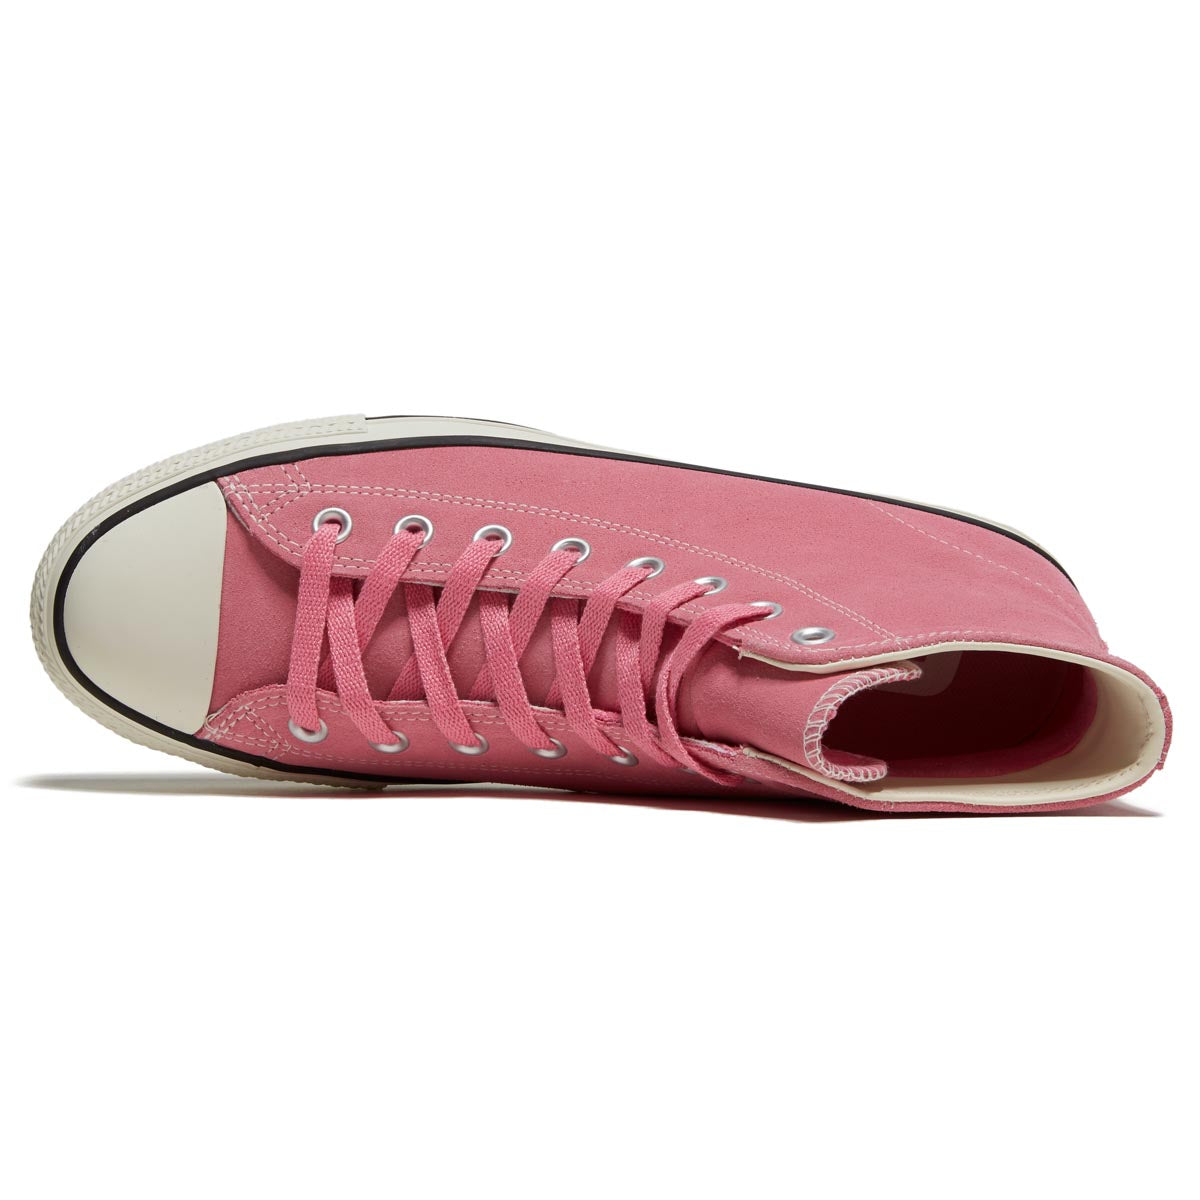 Converse Chuck Taylor All Star Pro Suede Hi Shoes - Oops Pink/Egret/Black image 3